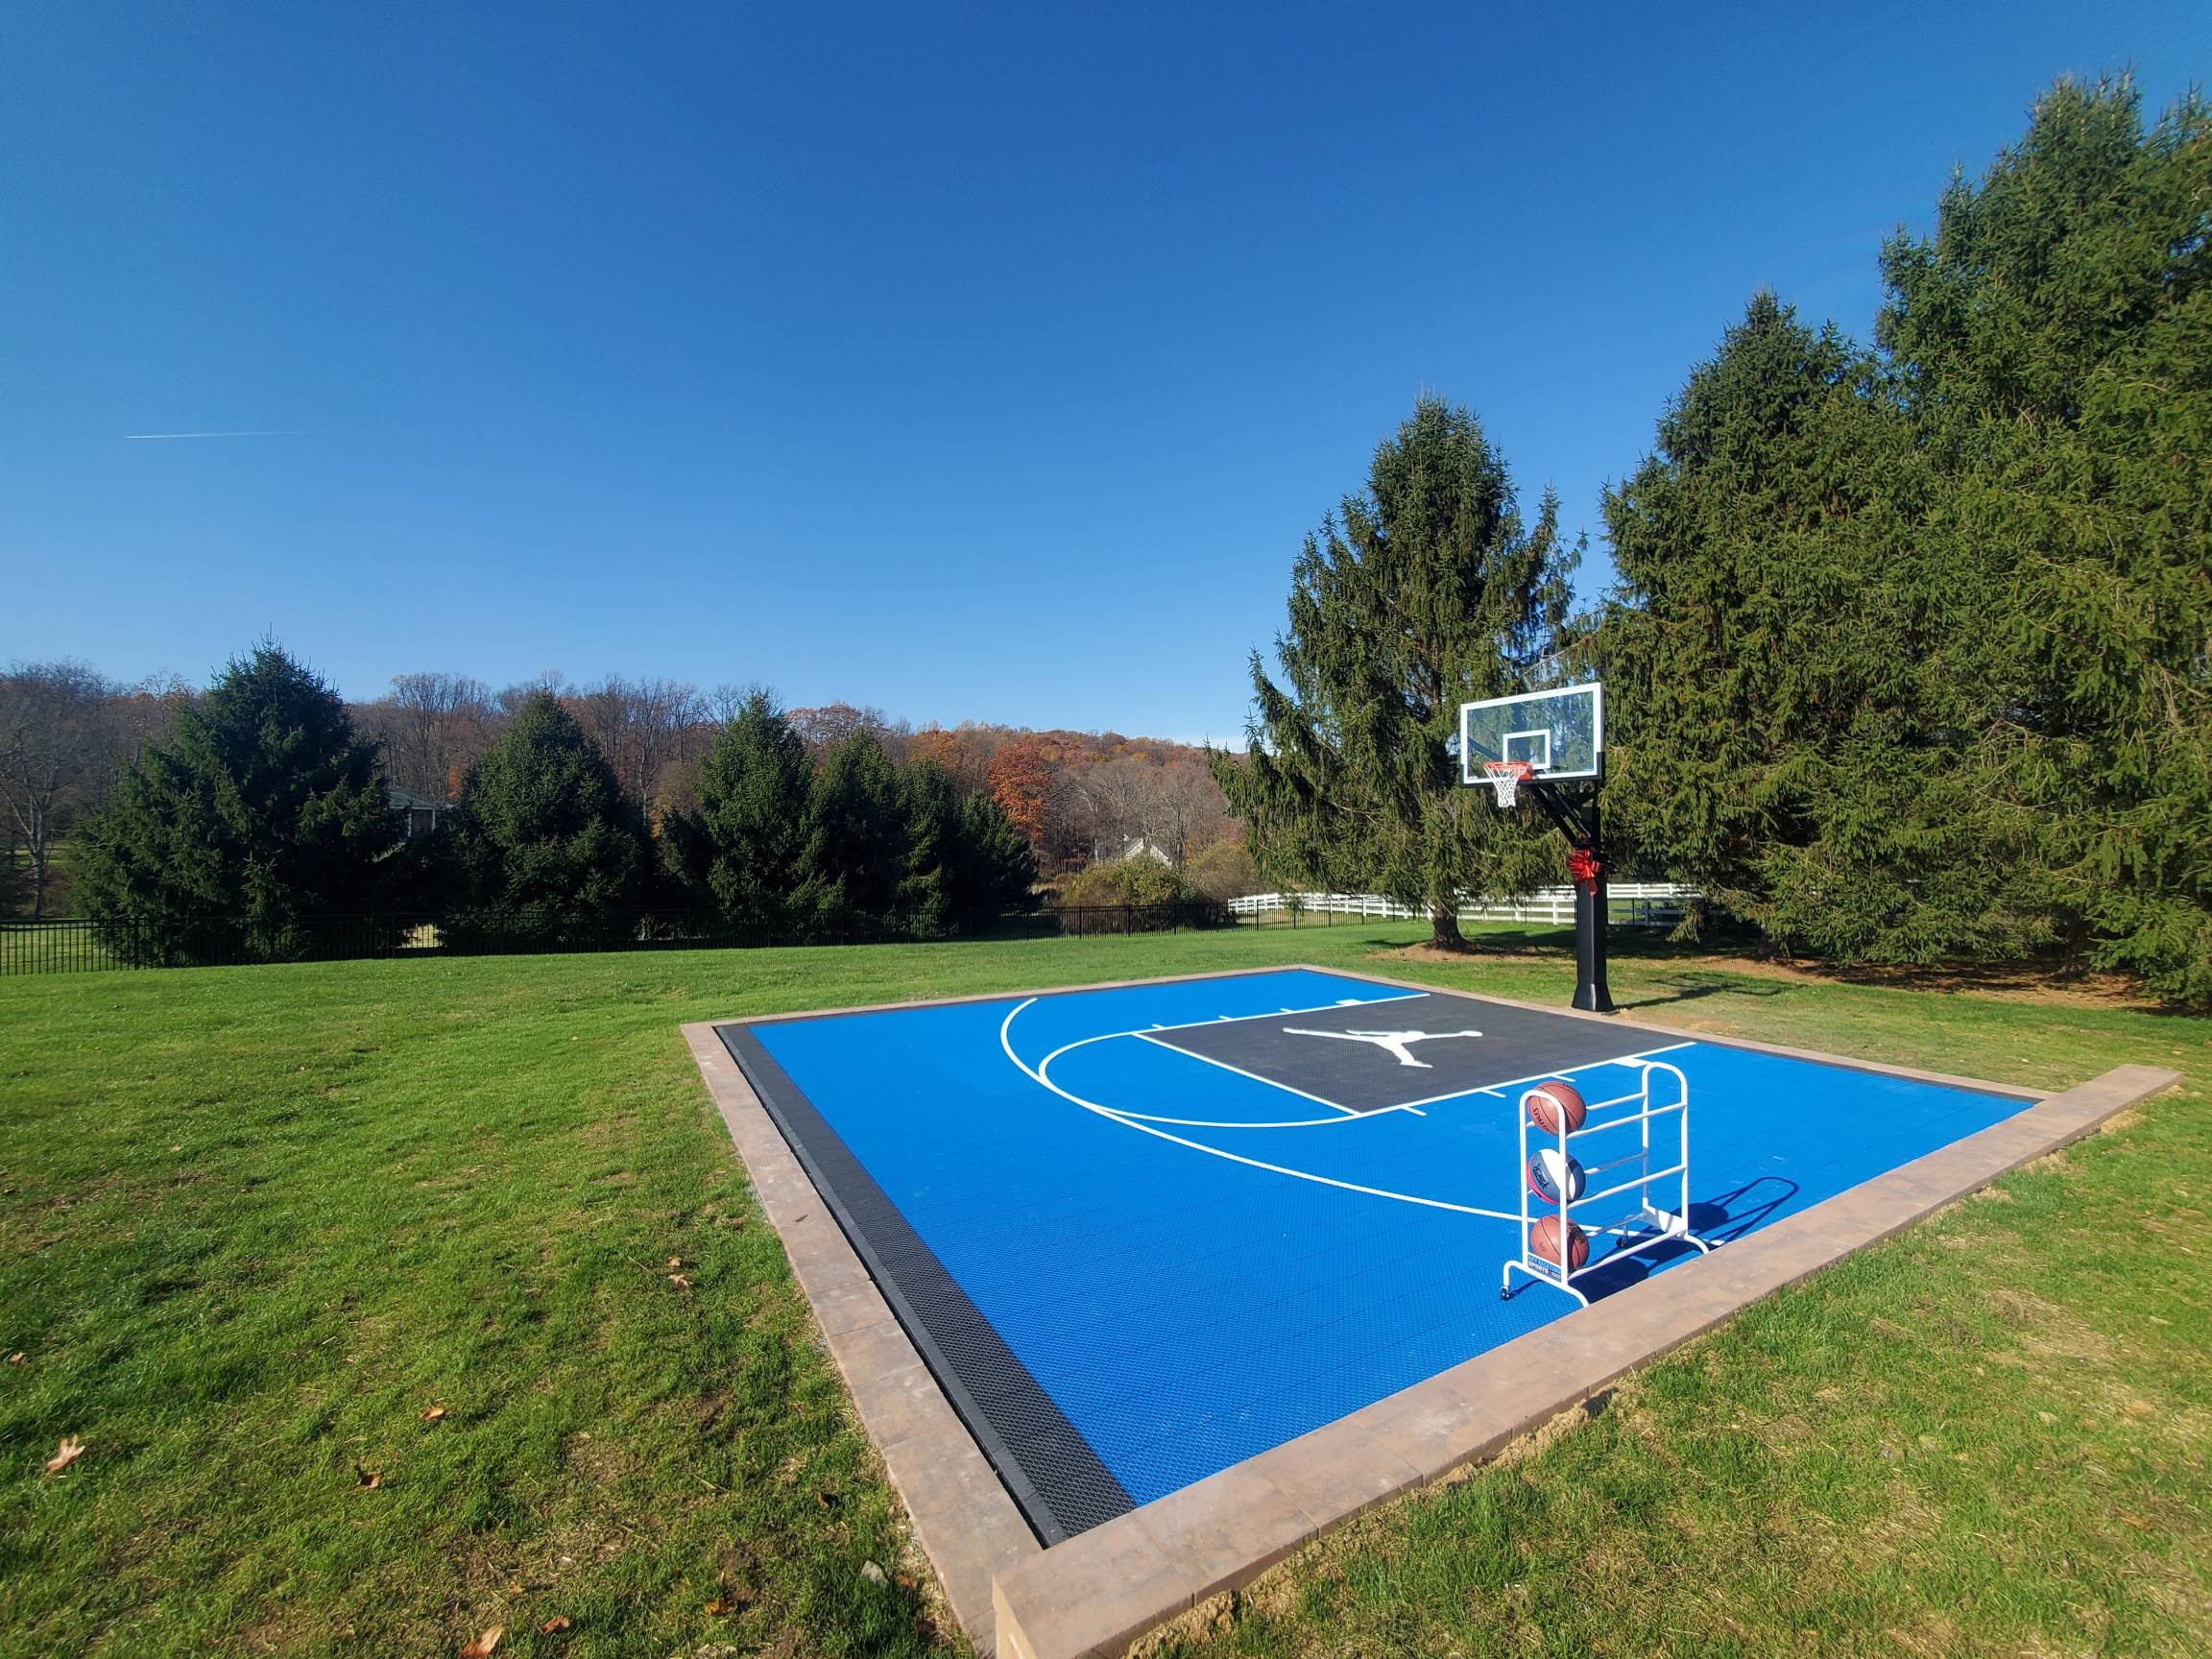 How Much Does A Home Basketball Court Cost Discount Save 55% jlcatj